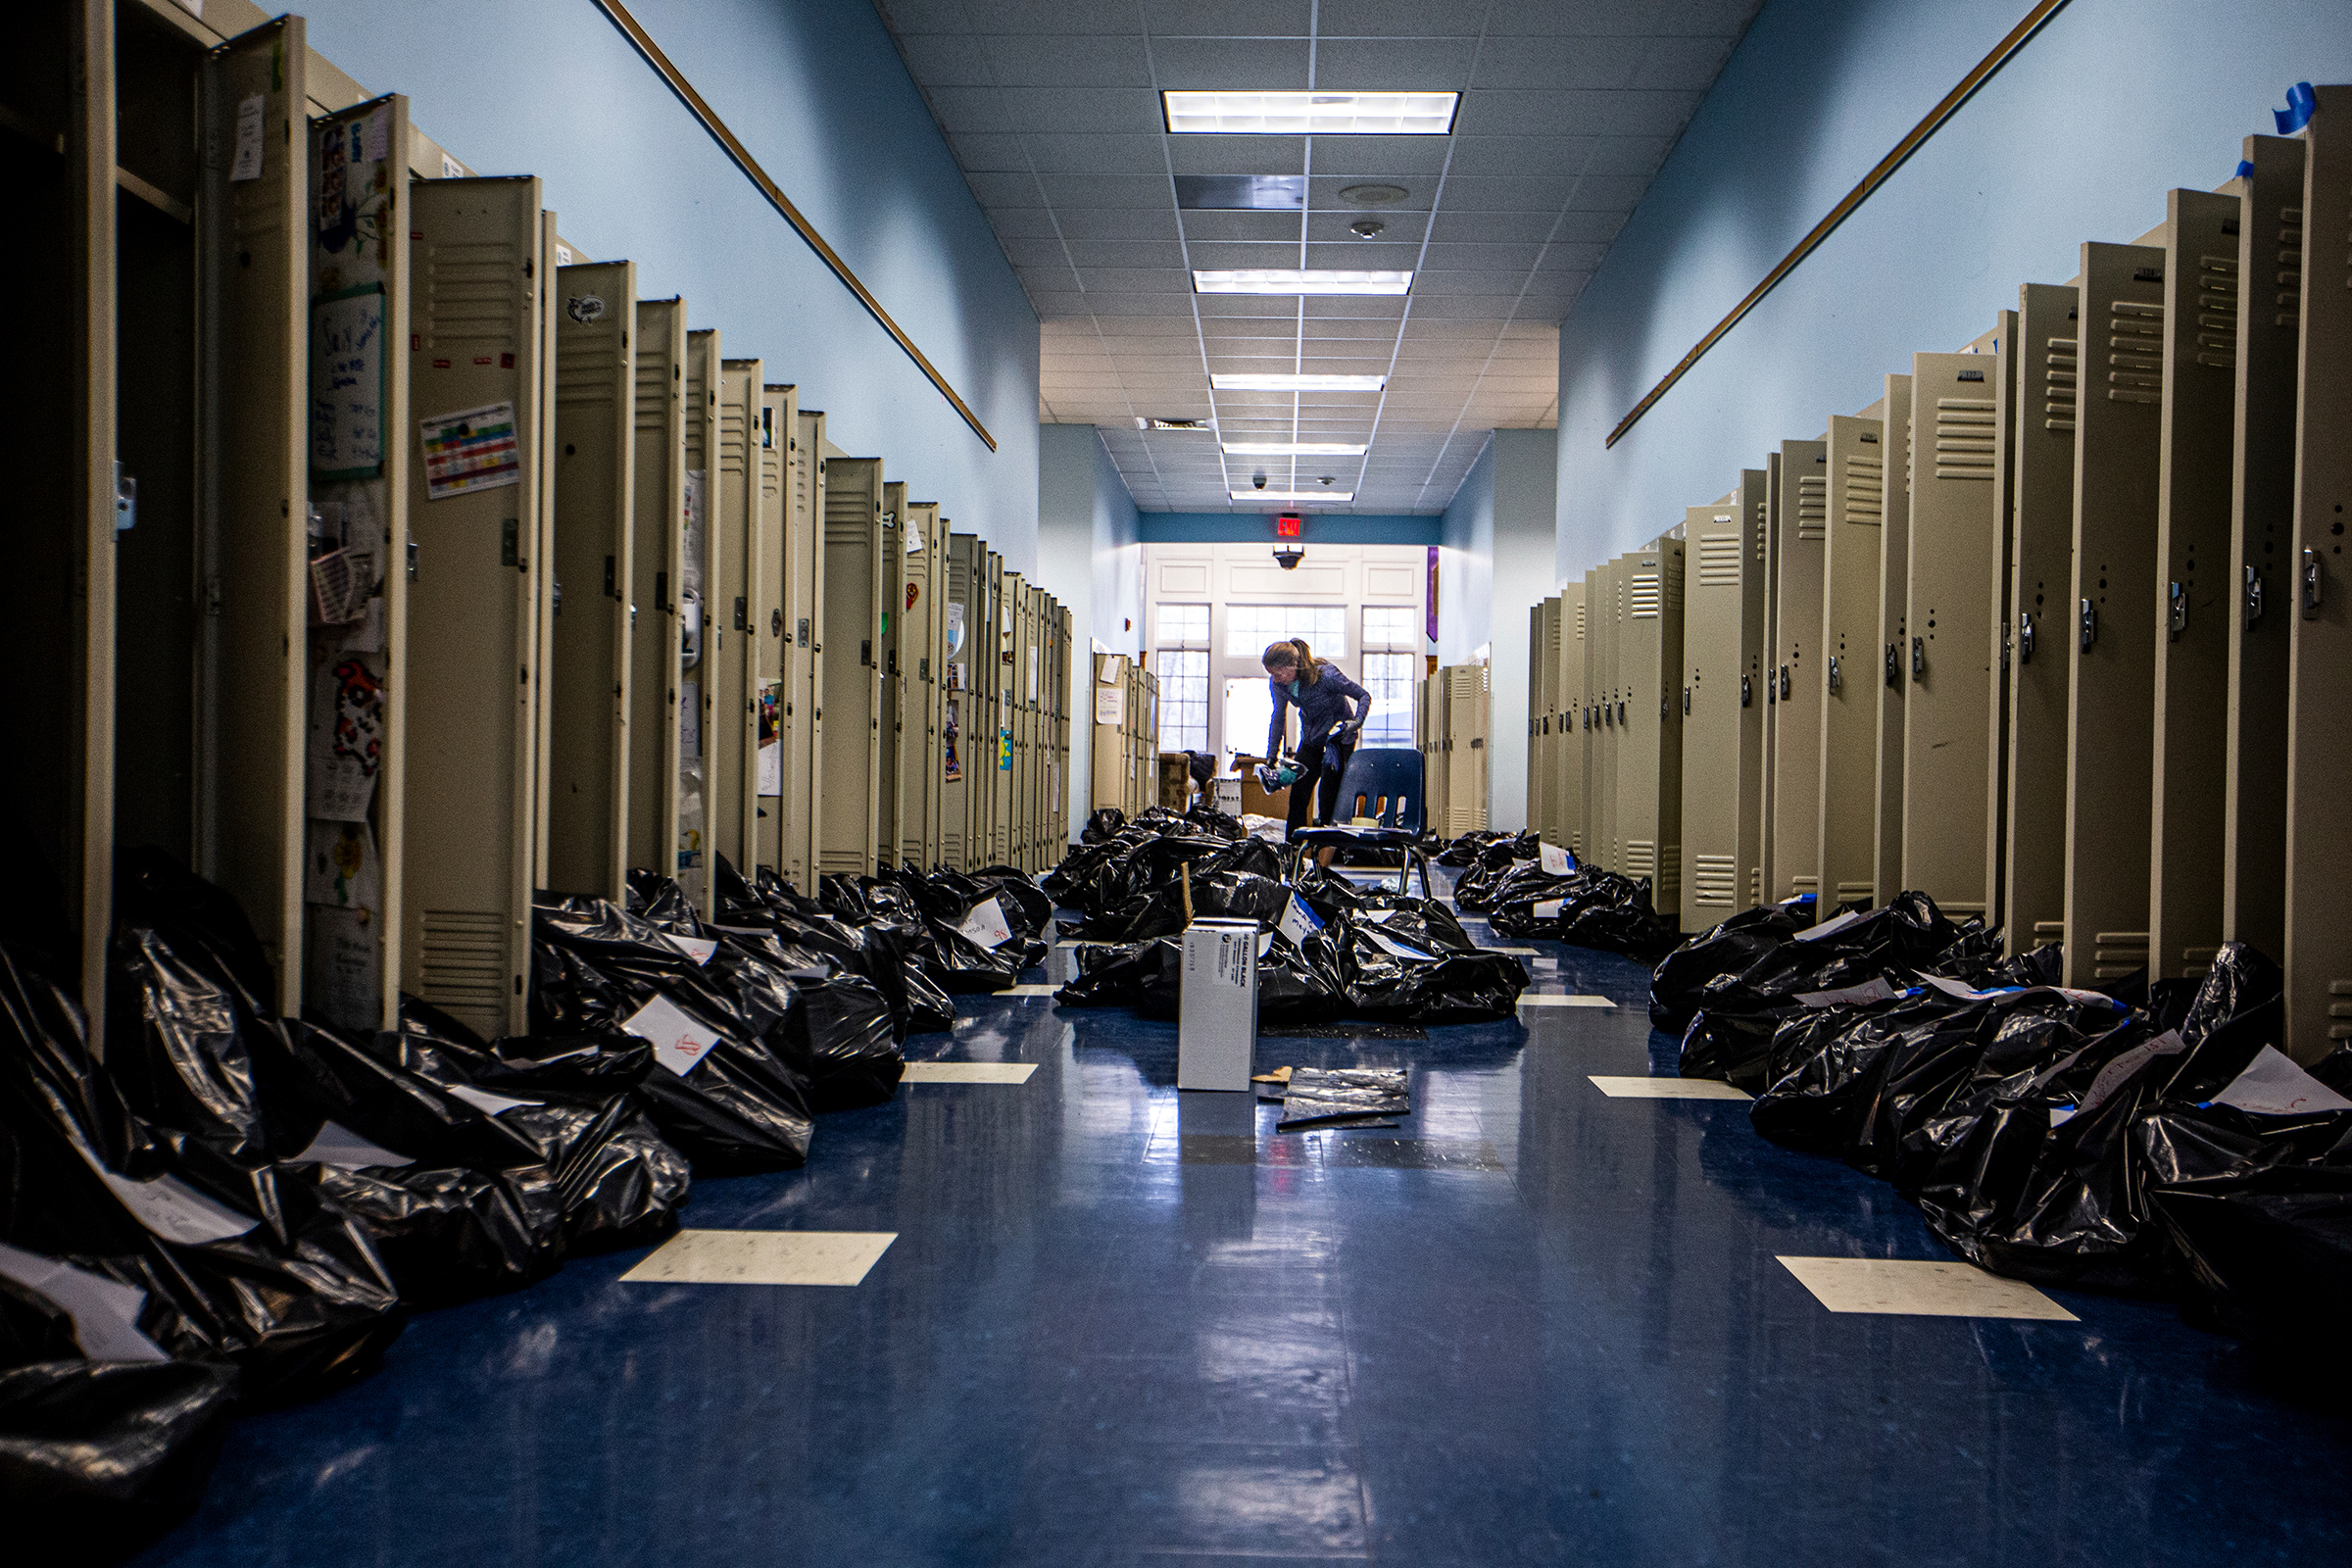 Kelen Walker packs students' locker contents into black trash bags as they clean and sanitize the school while students take online classes from home at Canterbury School in Greensboro, N.C., on March 17. (Khadejeh Nikouyeh—News & Record/AP)